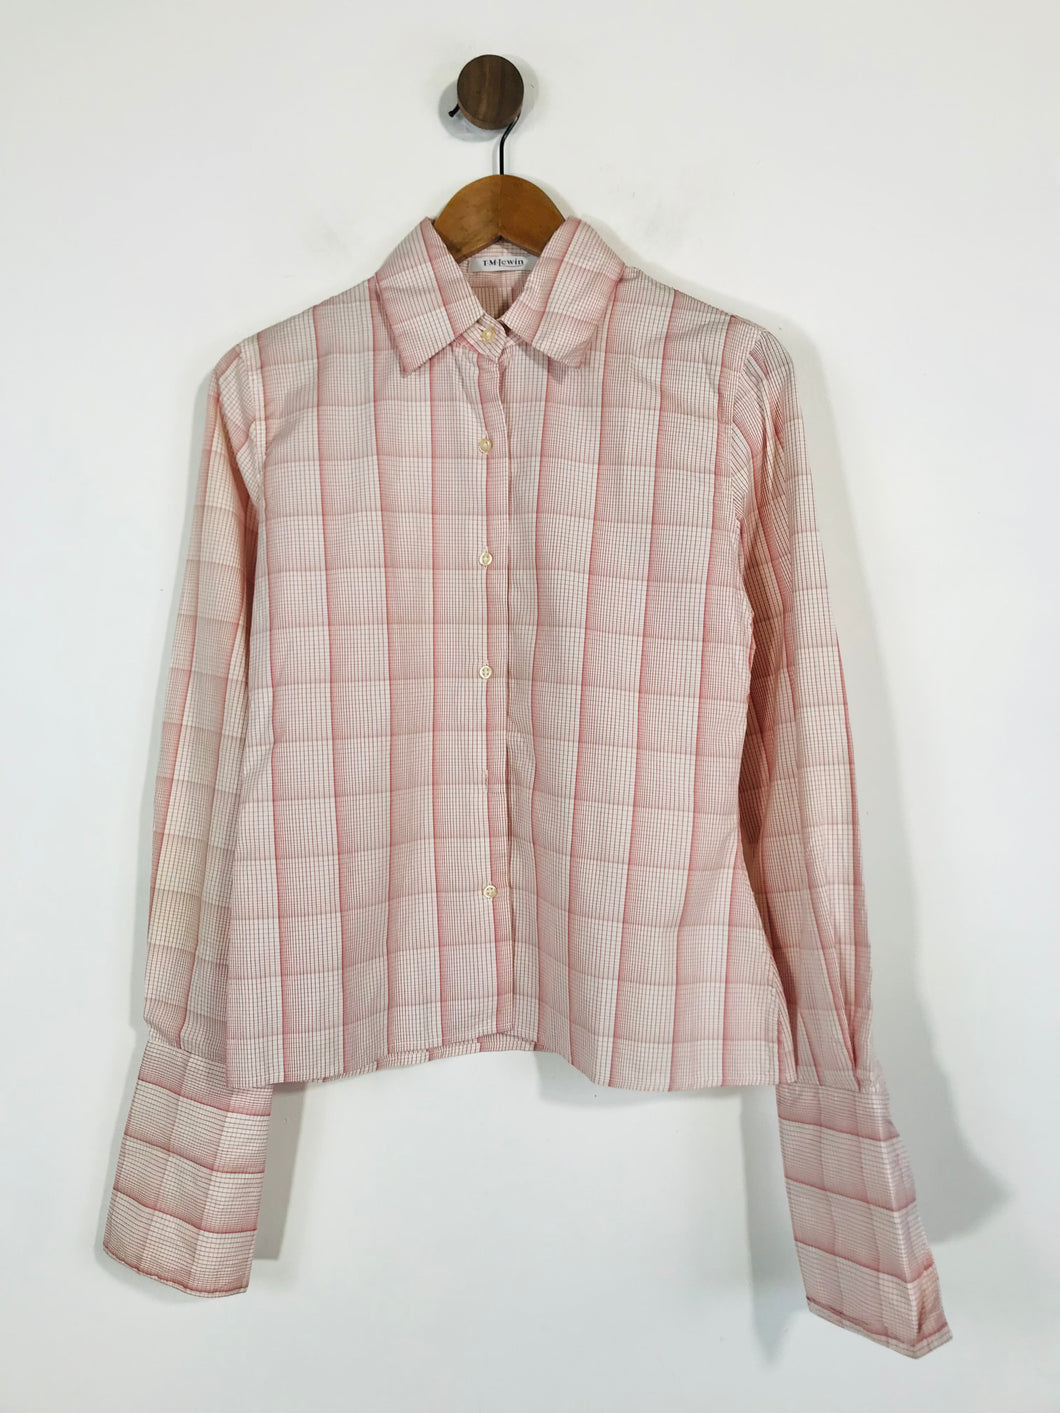 T.M. Lewin Women's Check Gingham Long Sleeve Button-Up Shirt | UK10 | Red